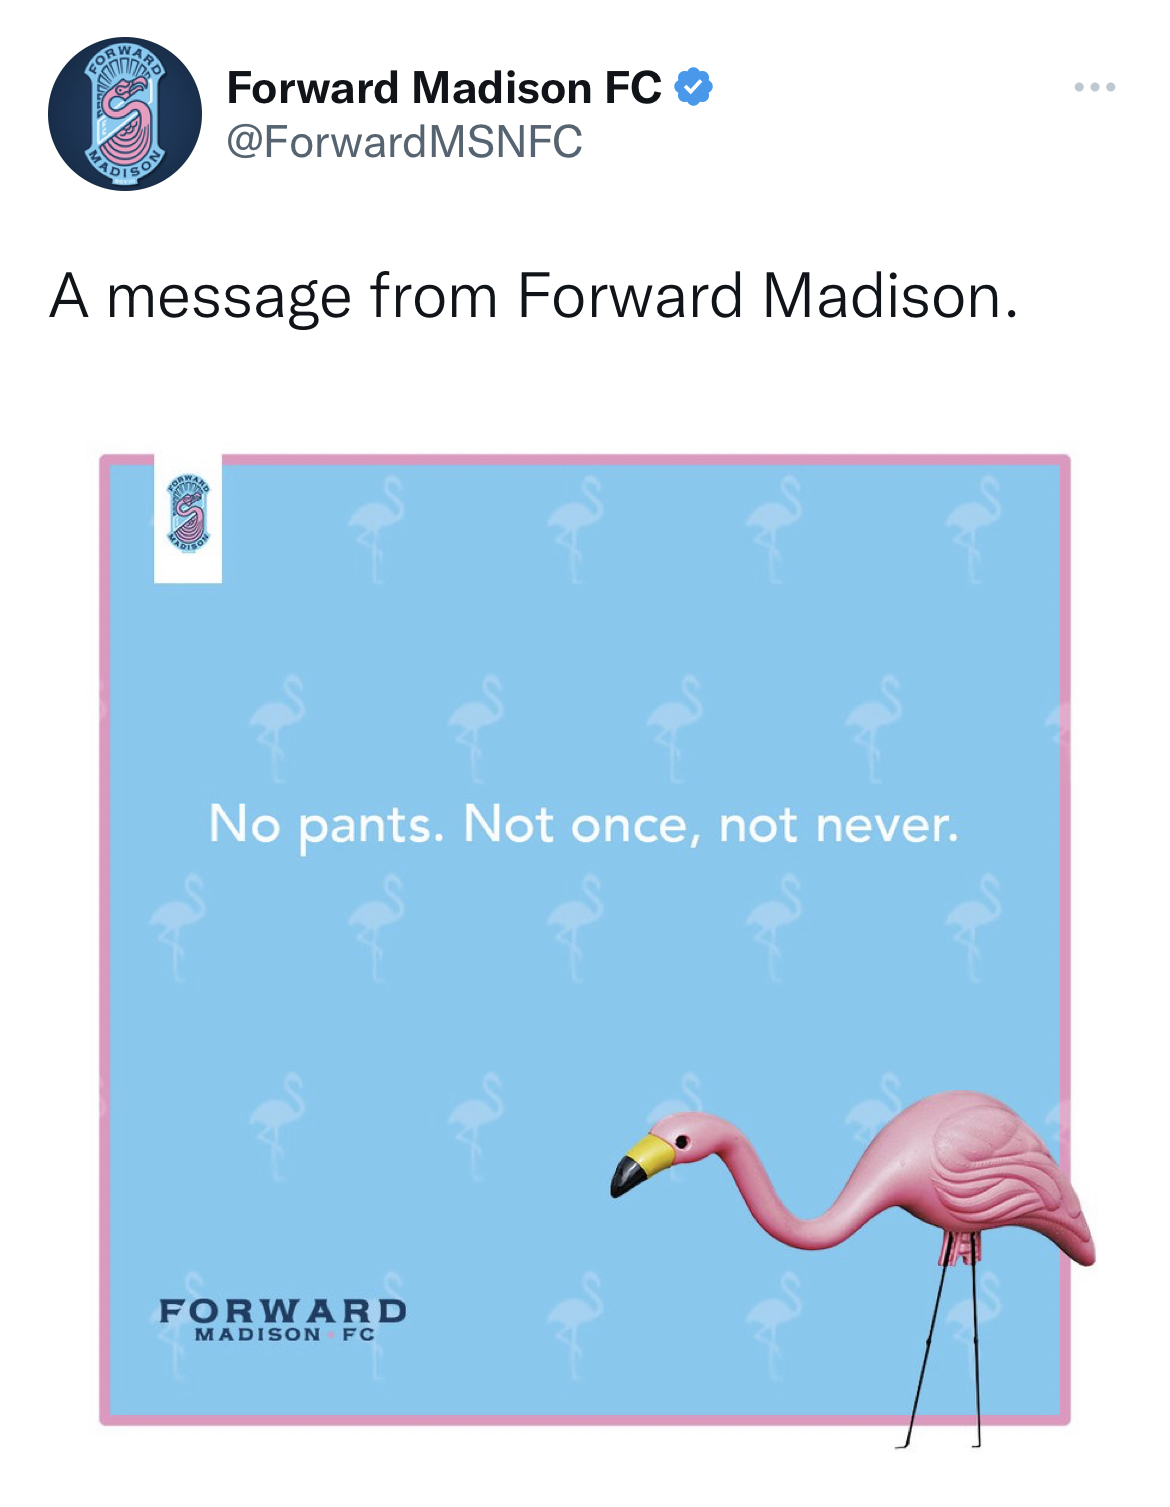 M&M's message spoofs - sky - Forward Madison Fc A message from Forward Madison. 8 No pants. Not once, not never. Forward Madison Fc www